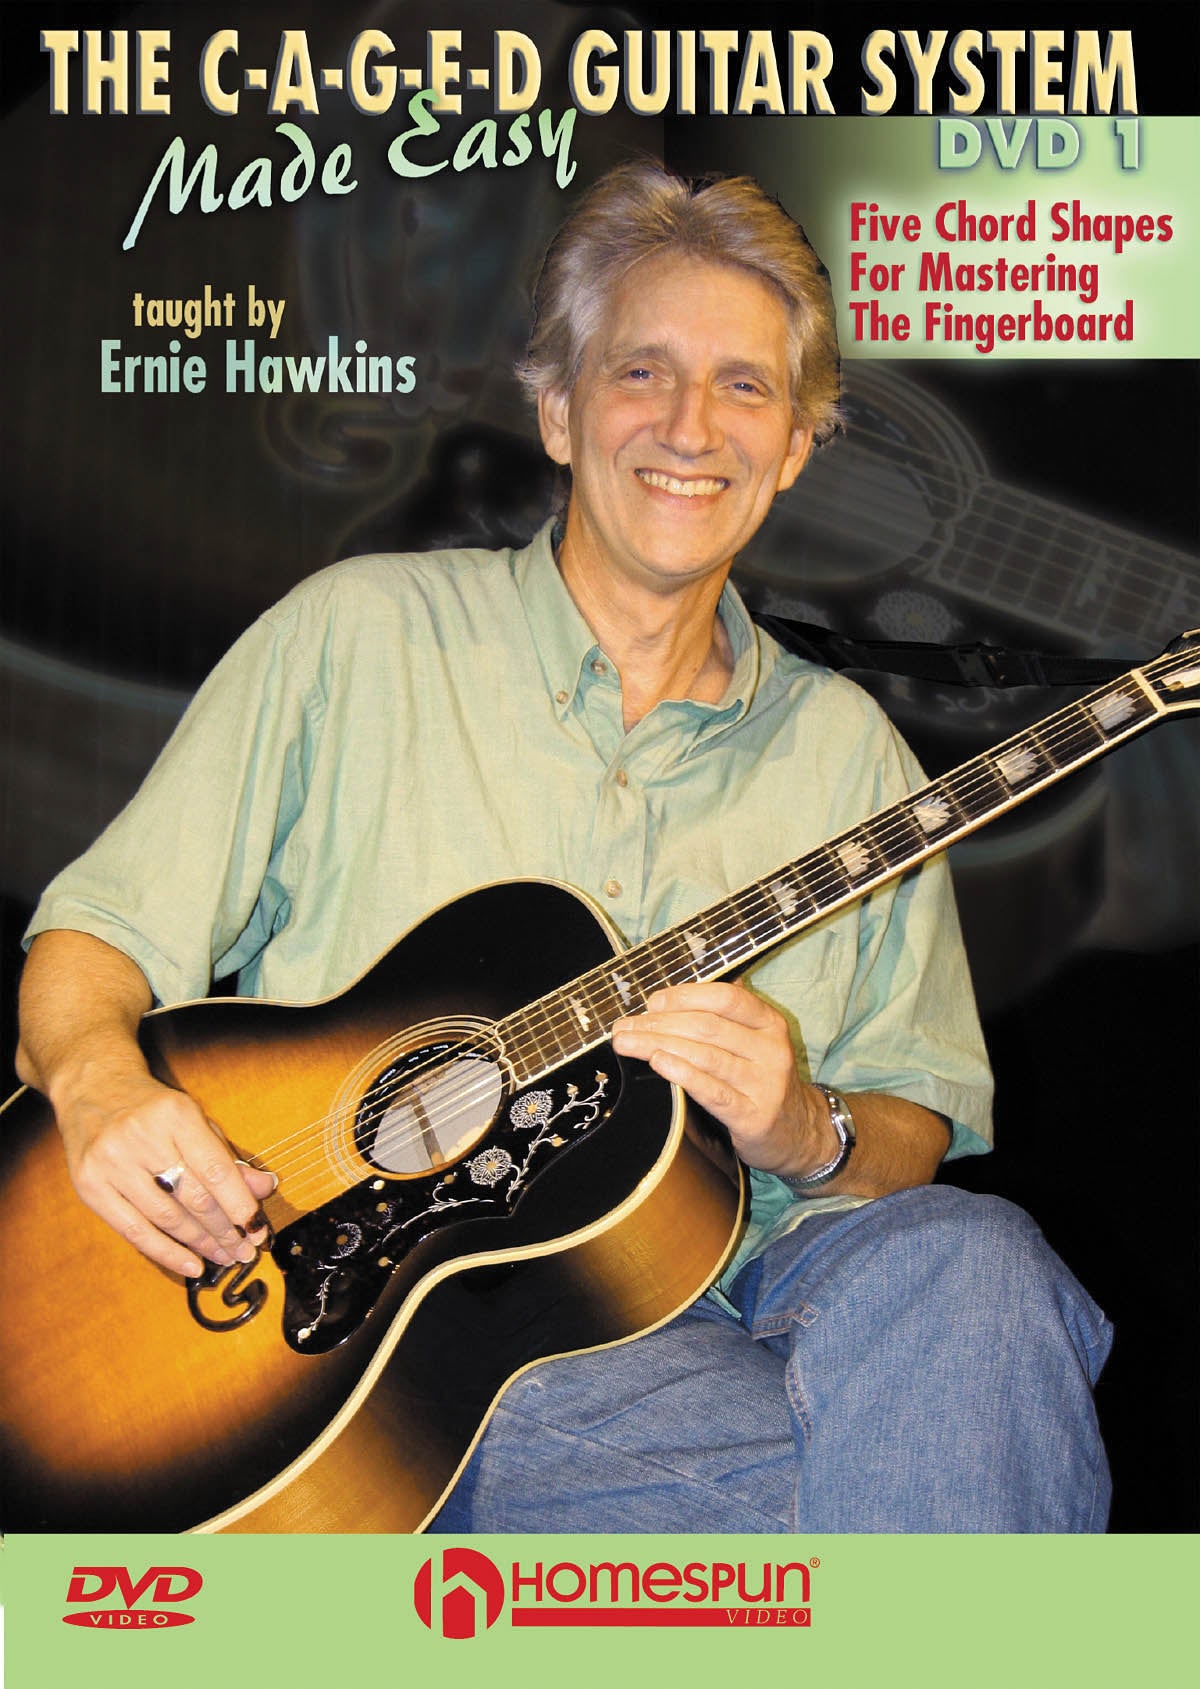 Image 1 of DVD-The CAGED Guitar System Made Easy: Vol. 1 - Five Chord Shapes for Mastering the Fingerboard - SKU# 300-DVD308 : Product Type Media : Elderly Instruments